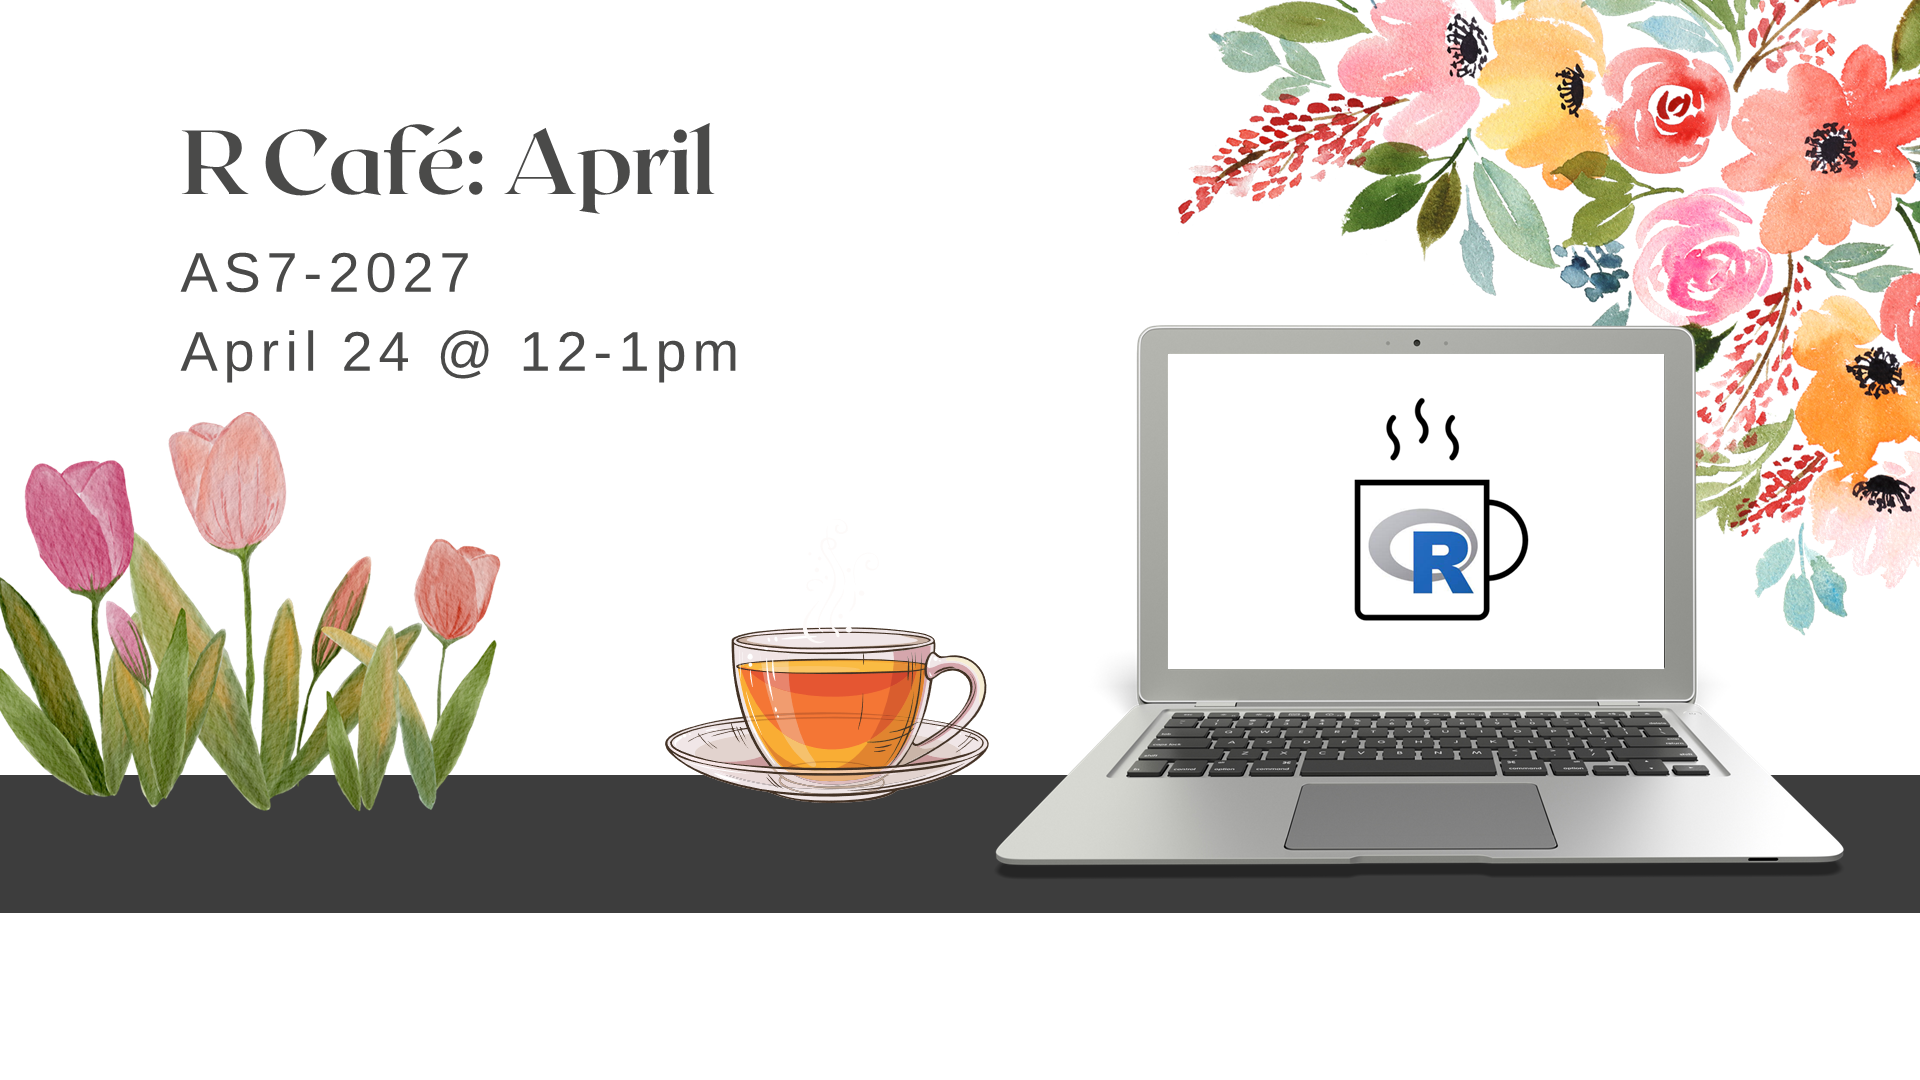 laptop with R Café logo, next to a cup of tea, tulips, and a background of flowers with text: R Café April. AS7-2072, April 24 at 12 to 1 pm